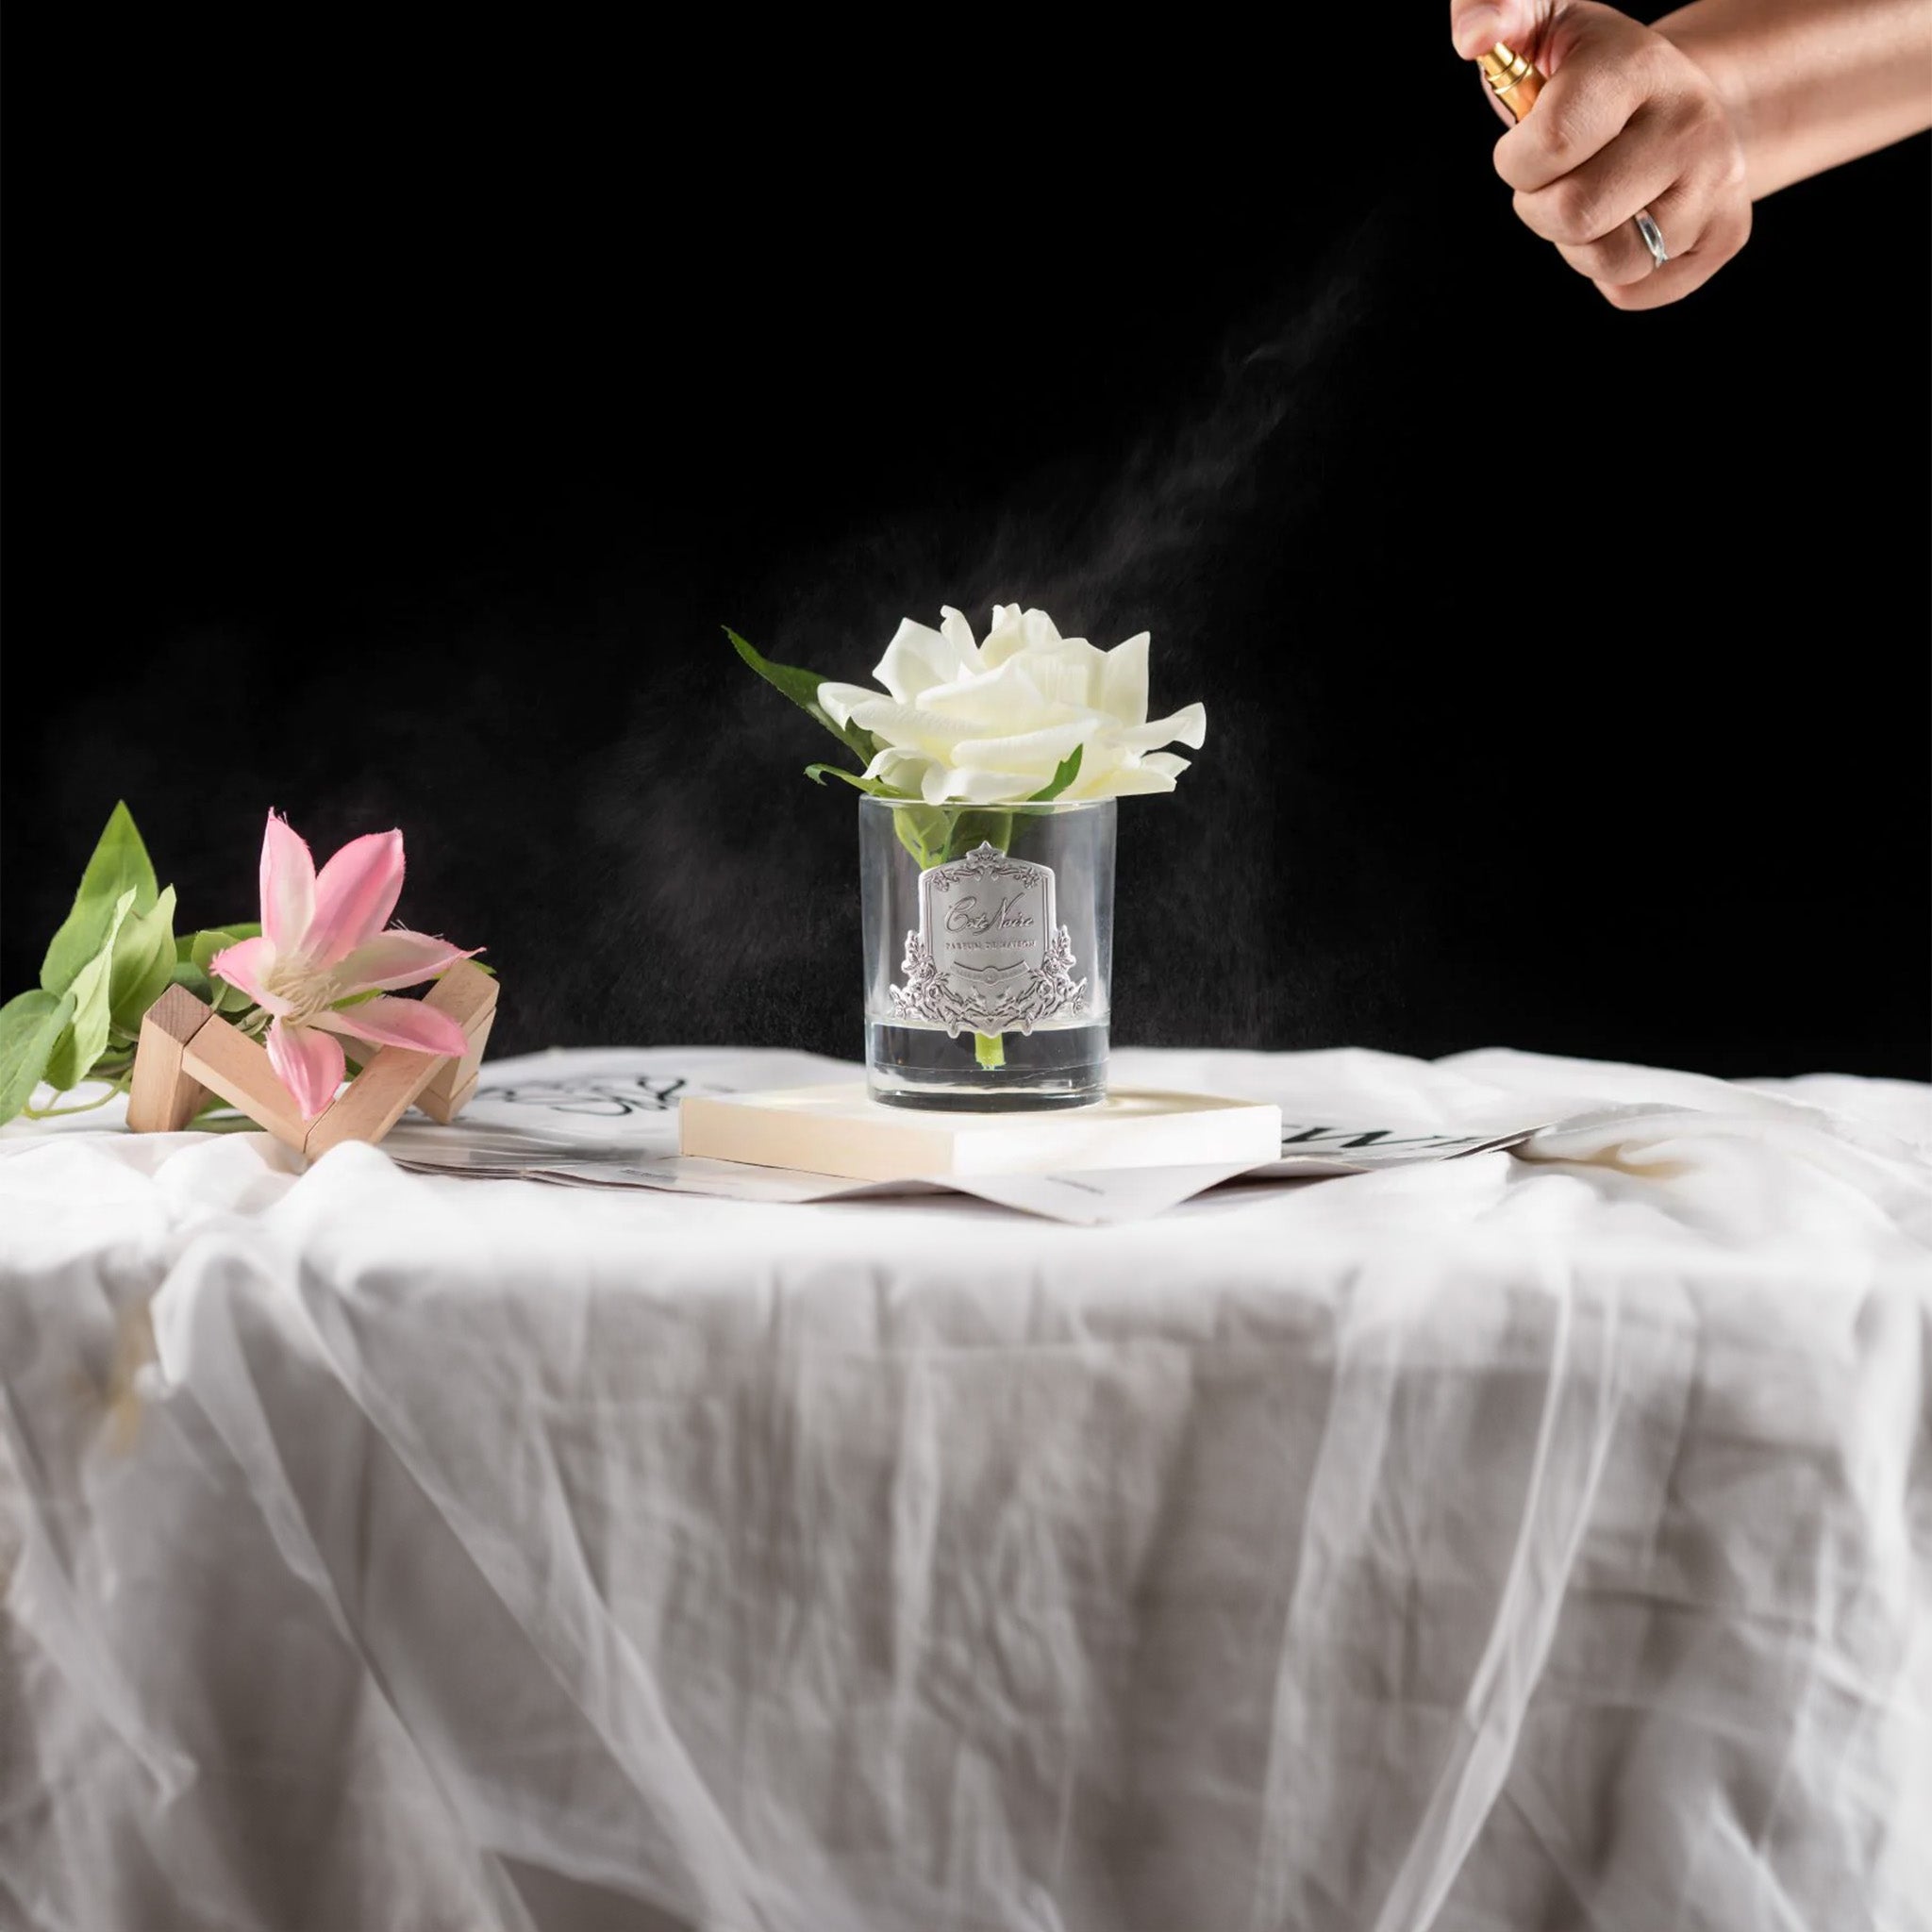 a table topped with a person spritzing fragrance on a white rose in a glass vase by cote noire